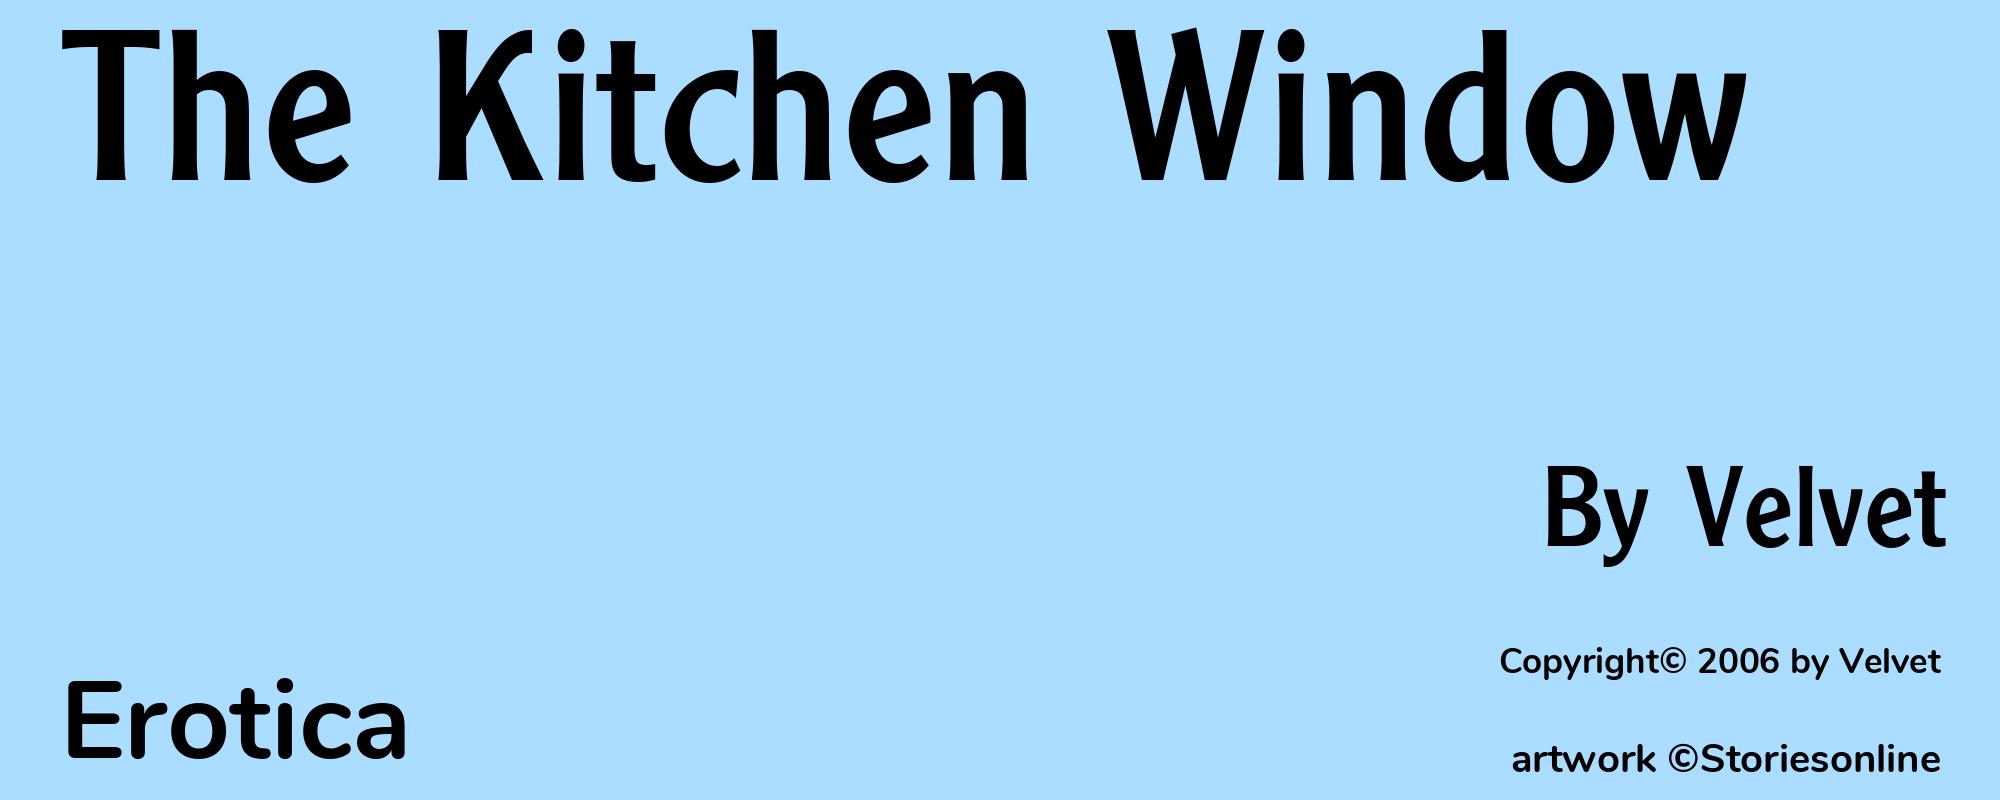 The Kitchen Window - Cover